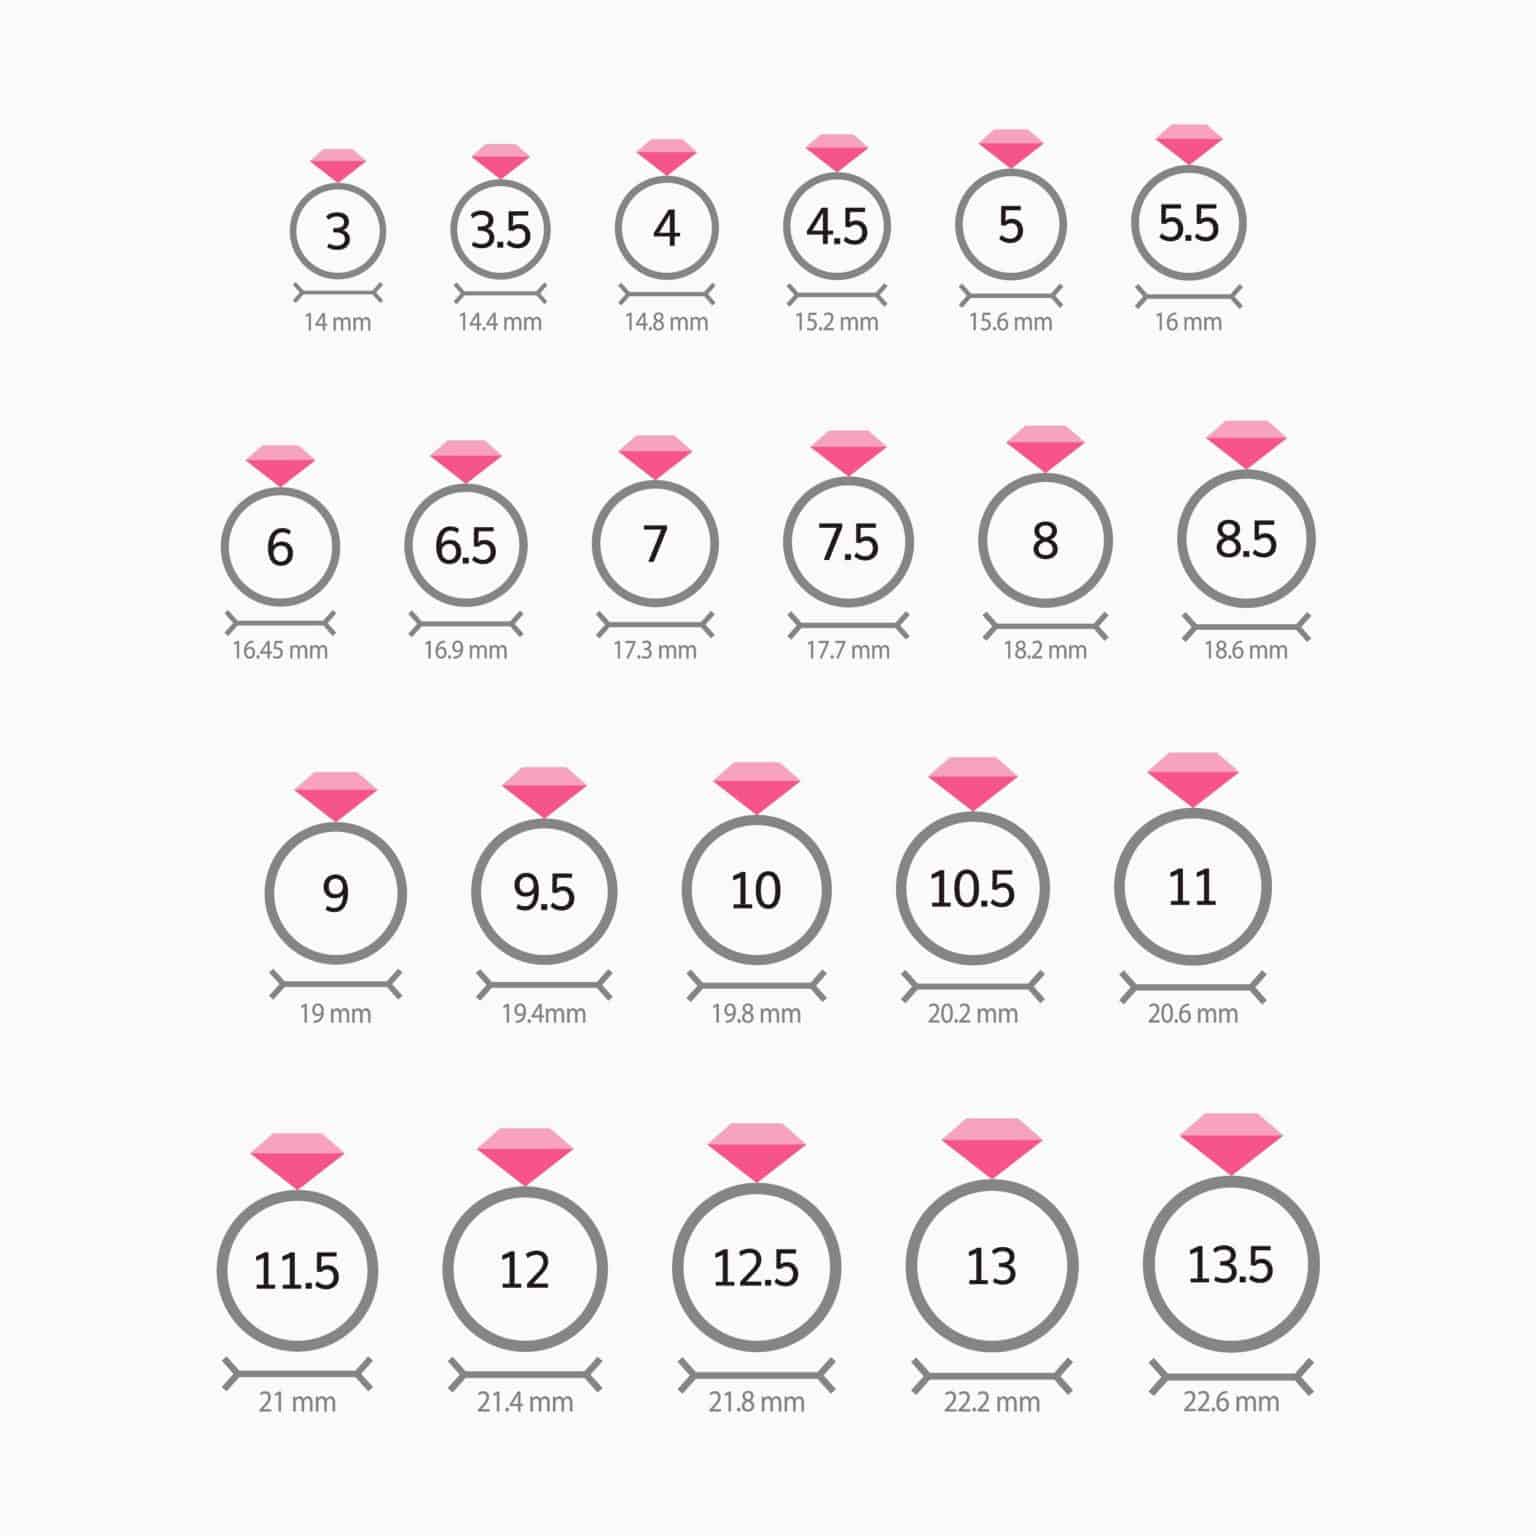 Ring Size Chart Online Printable - Printable World Holiday